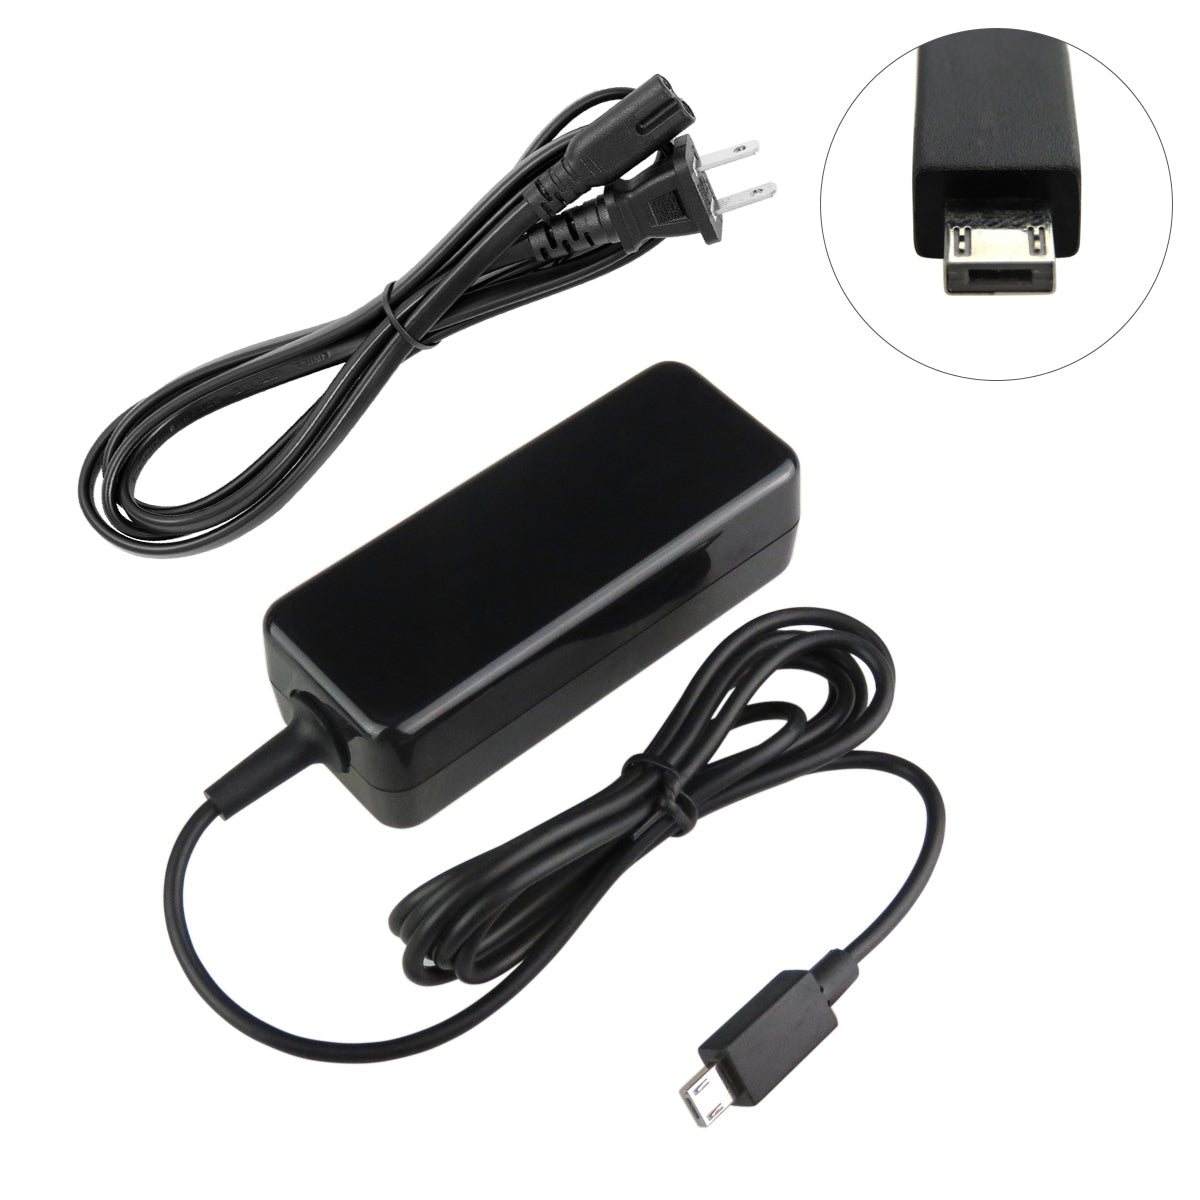 Charger for ASUS EeeBook X205TA-SATM0404G Laptop.